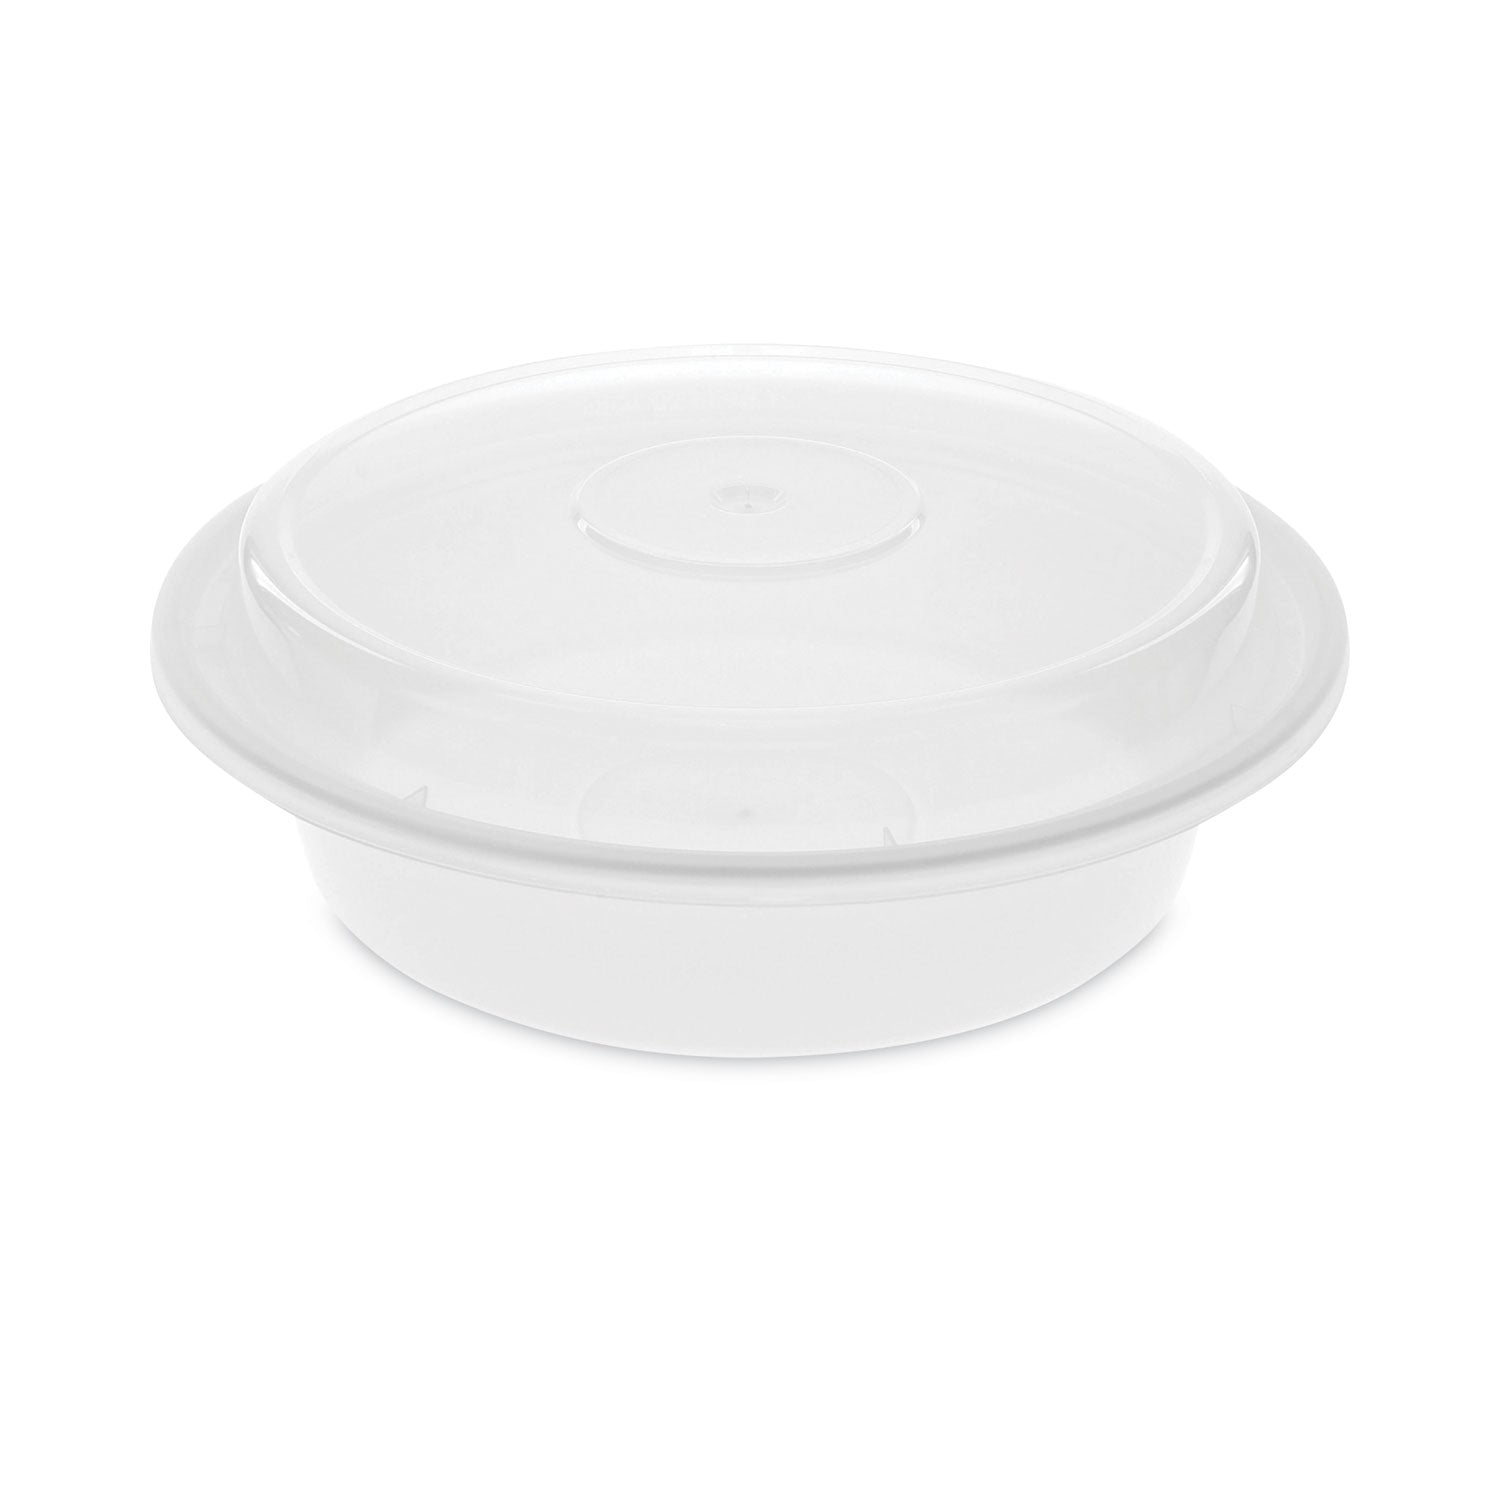 newspring-versatainer-microwavable-containers-24-oz-7-x-7-x-238-white-clear-plastic-150-carton_pctnc723 - 1